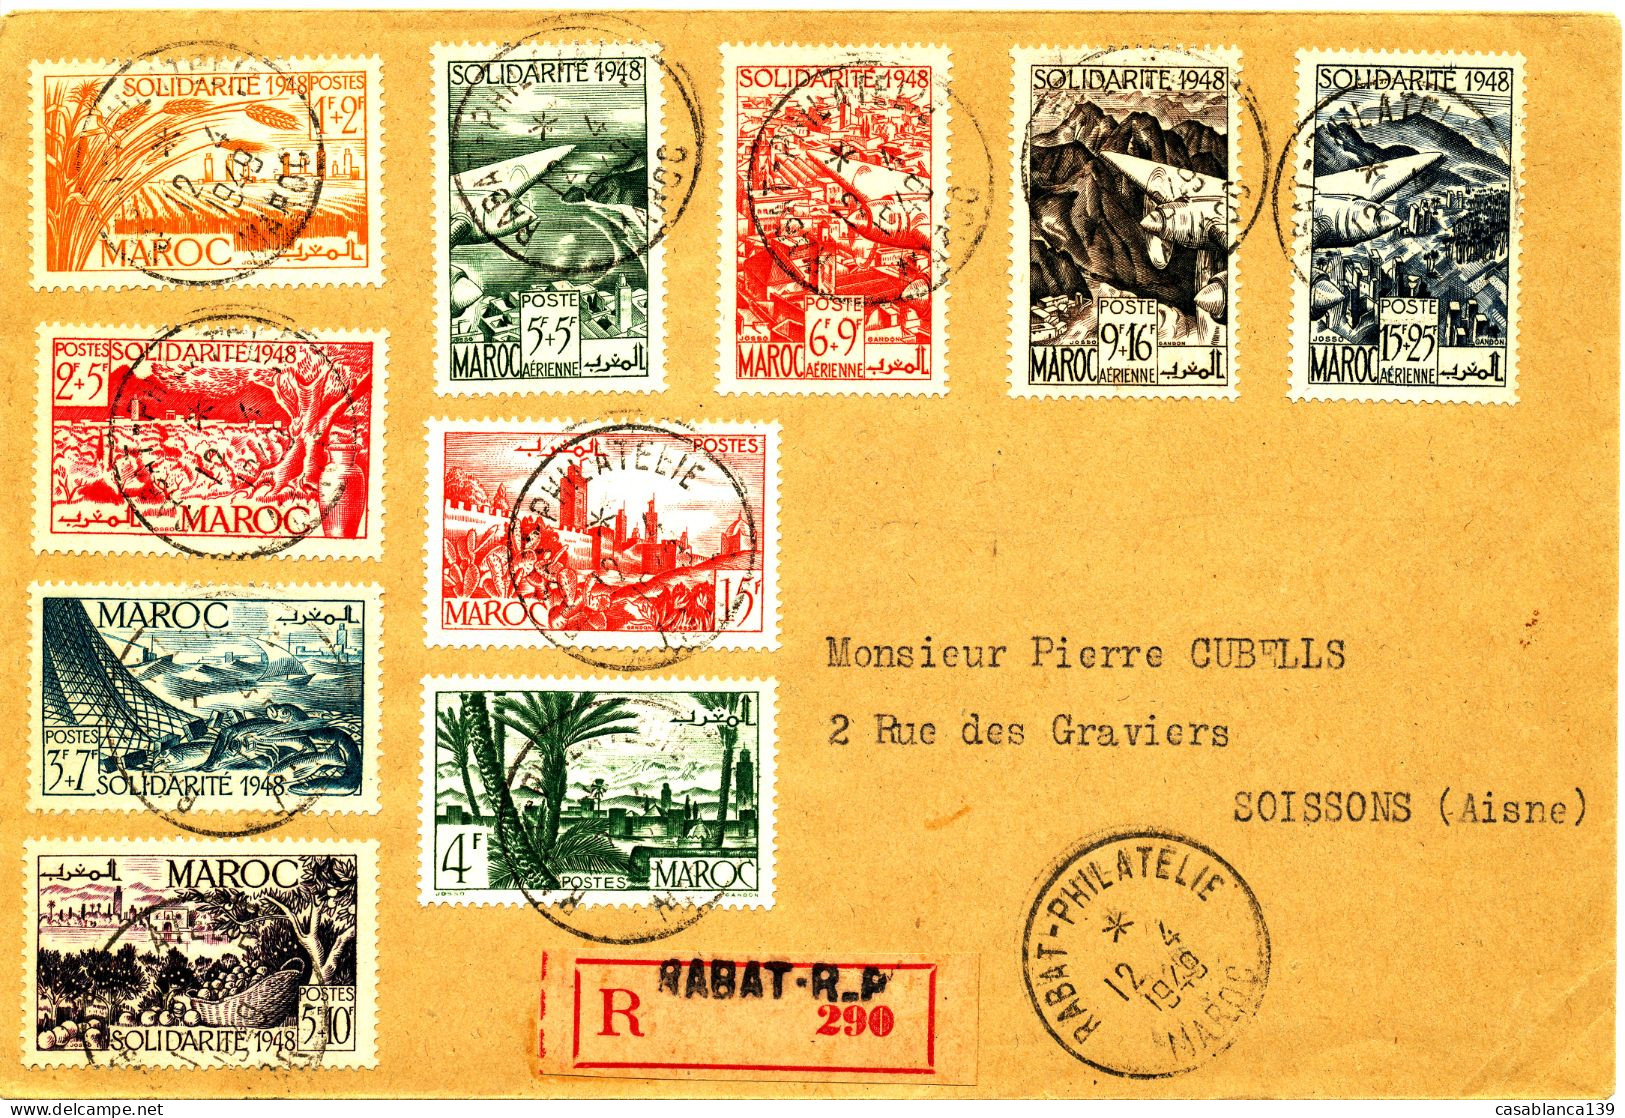 Morocco 1948 Complete Set Of Solidarity 1948 Mi 283-290 Rabat To France, Very Fine Used (RARE) - Gebraucht